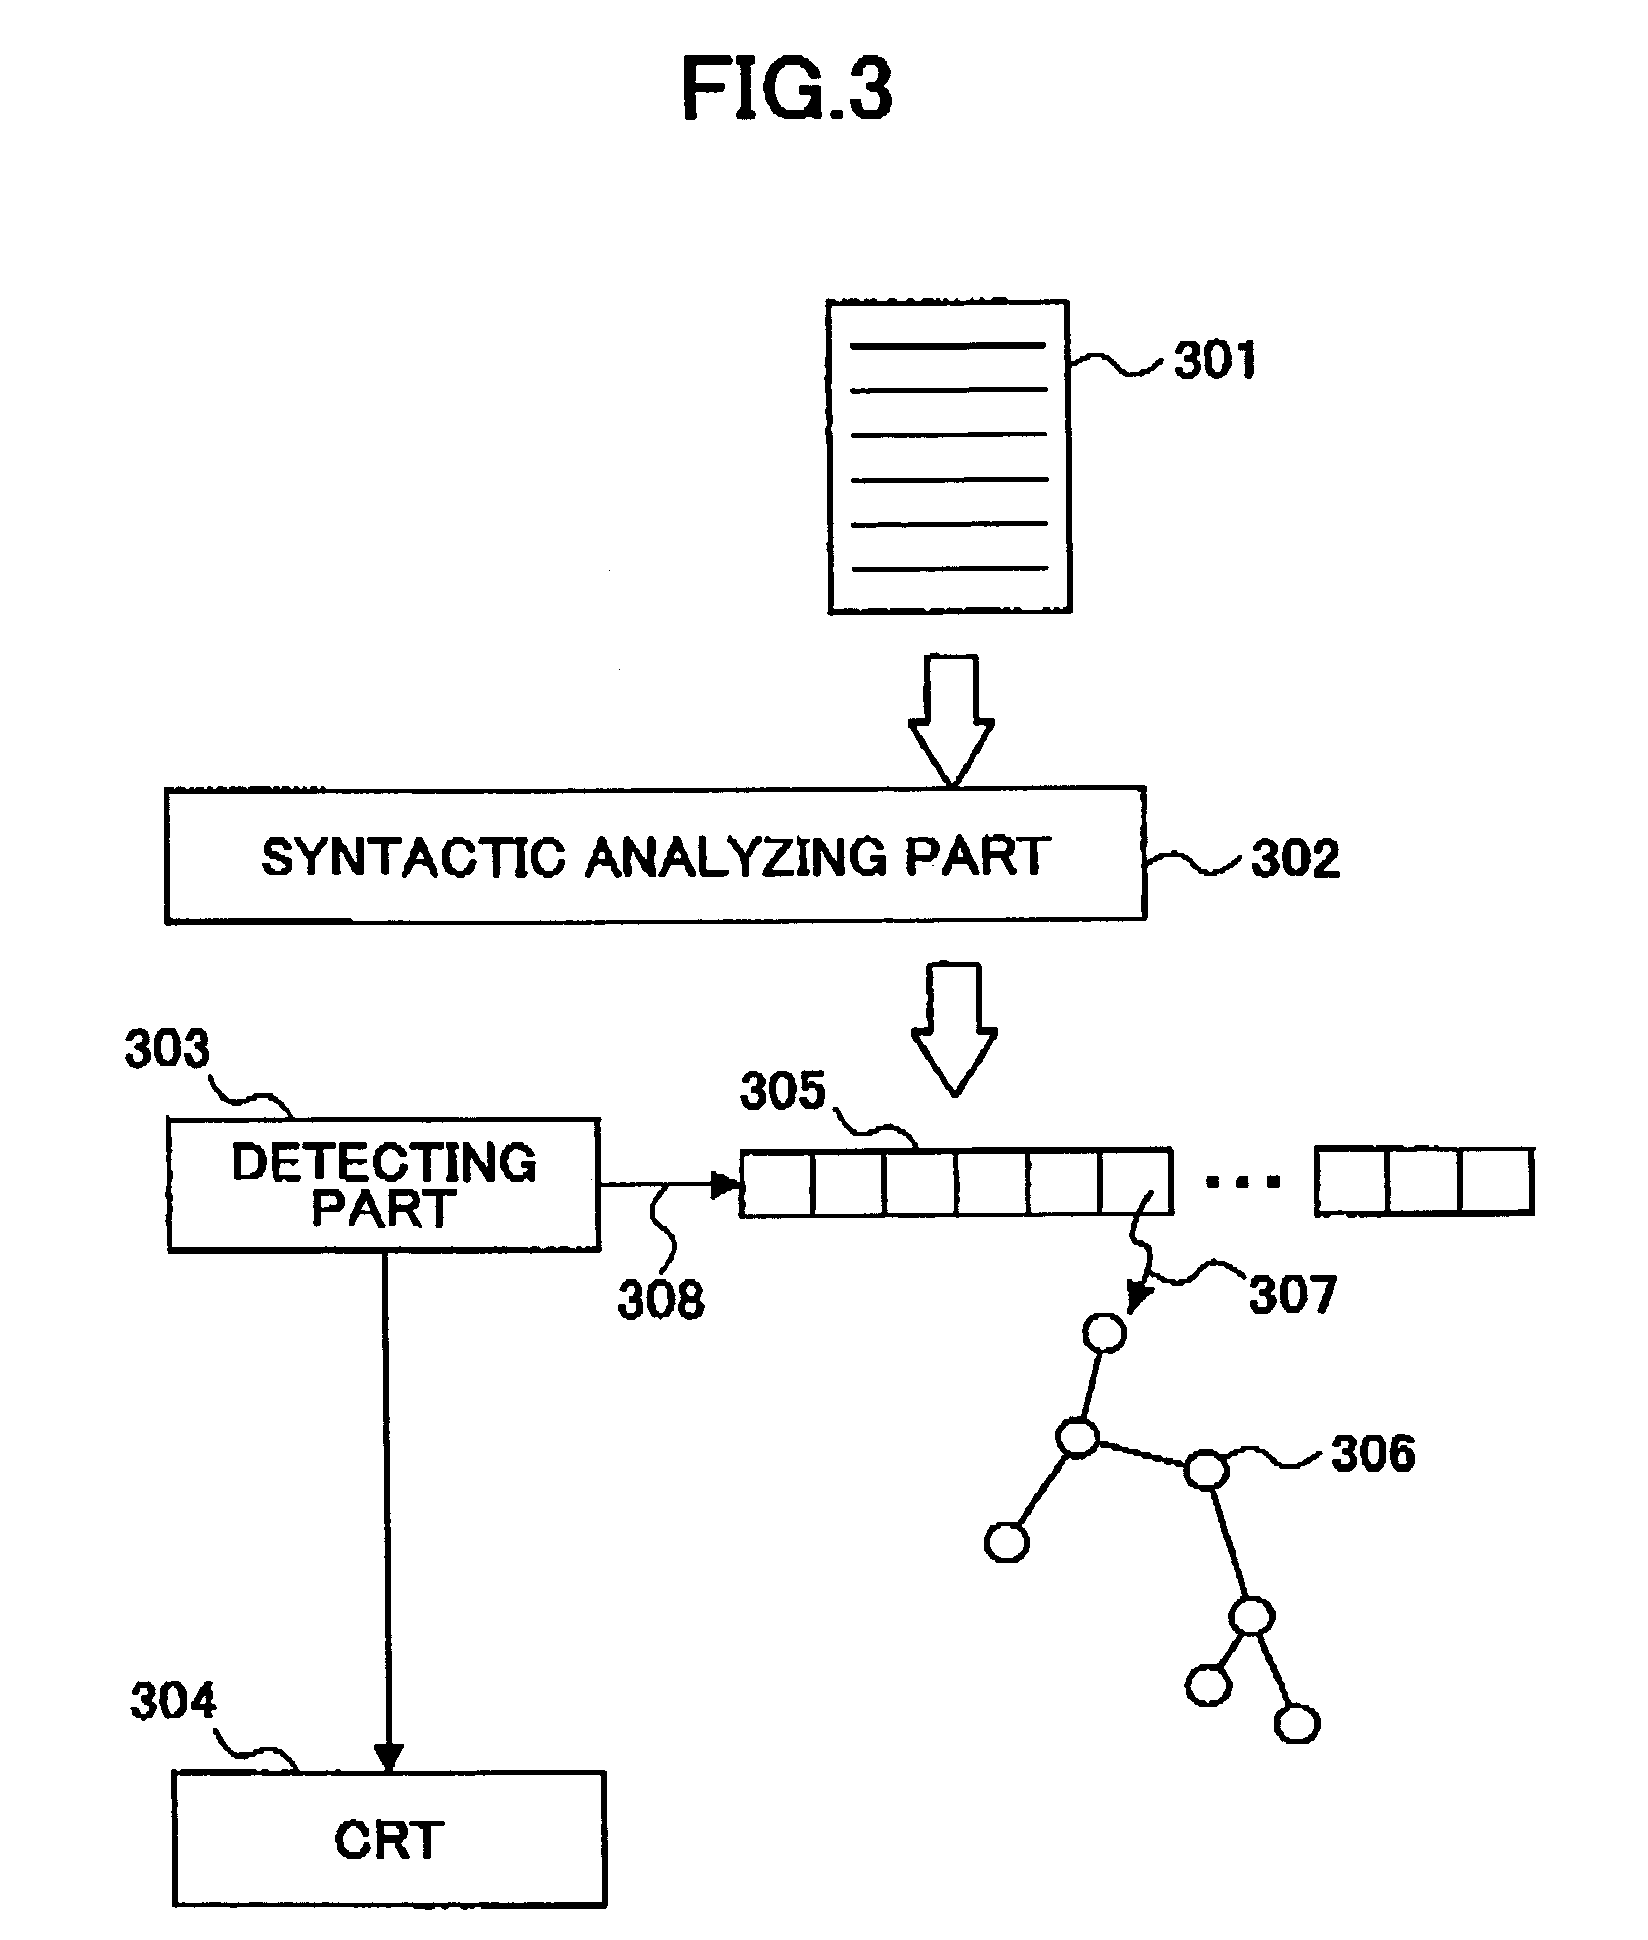 Design supporting apparatus capable of checking functional description of large-scale integrated circuit to detect fault in said circuit